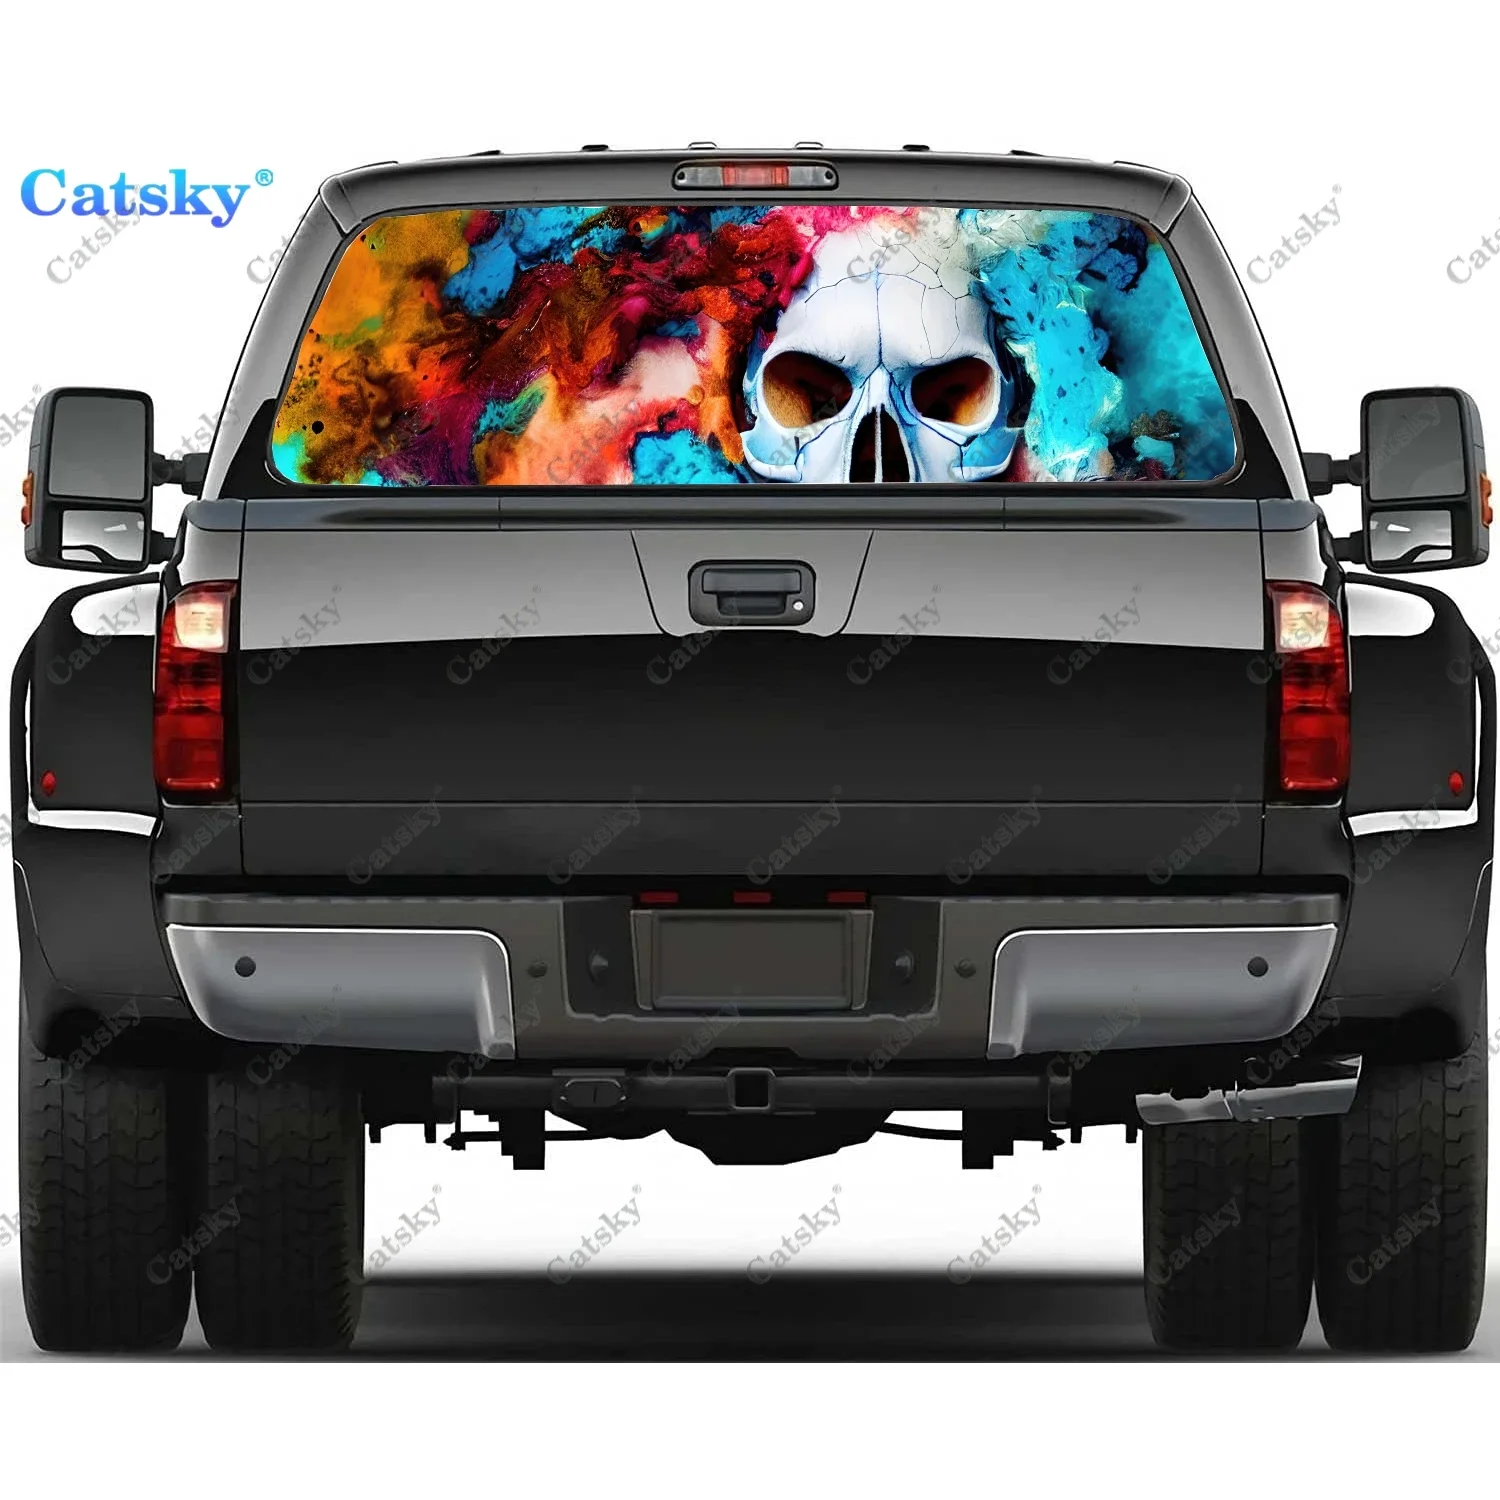 

Fire Skull Evil Skeleton Rear Window Decal Fit Pickup,Truck,Car Universal See Through Perforated Back Windows Vinyl Sticker